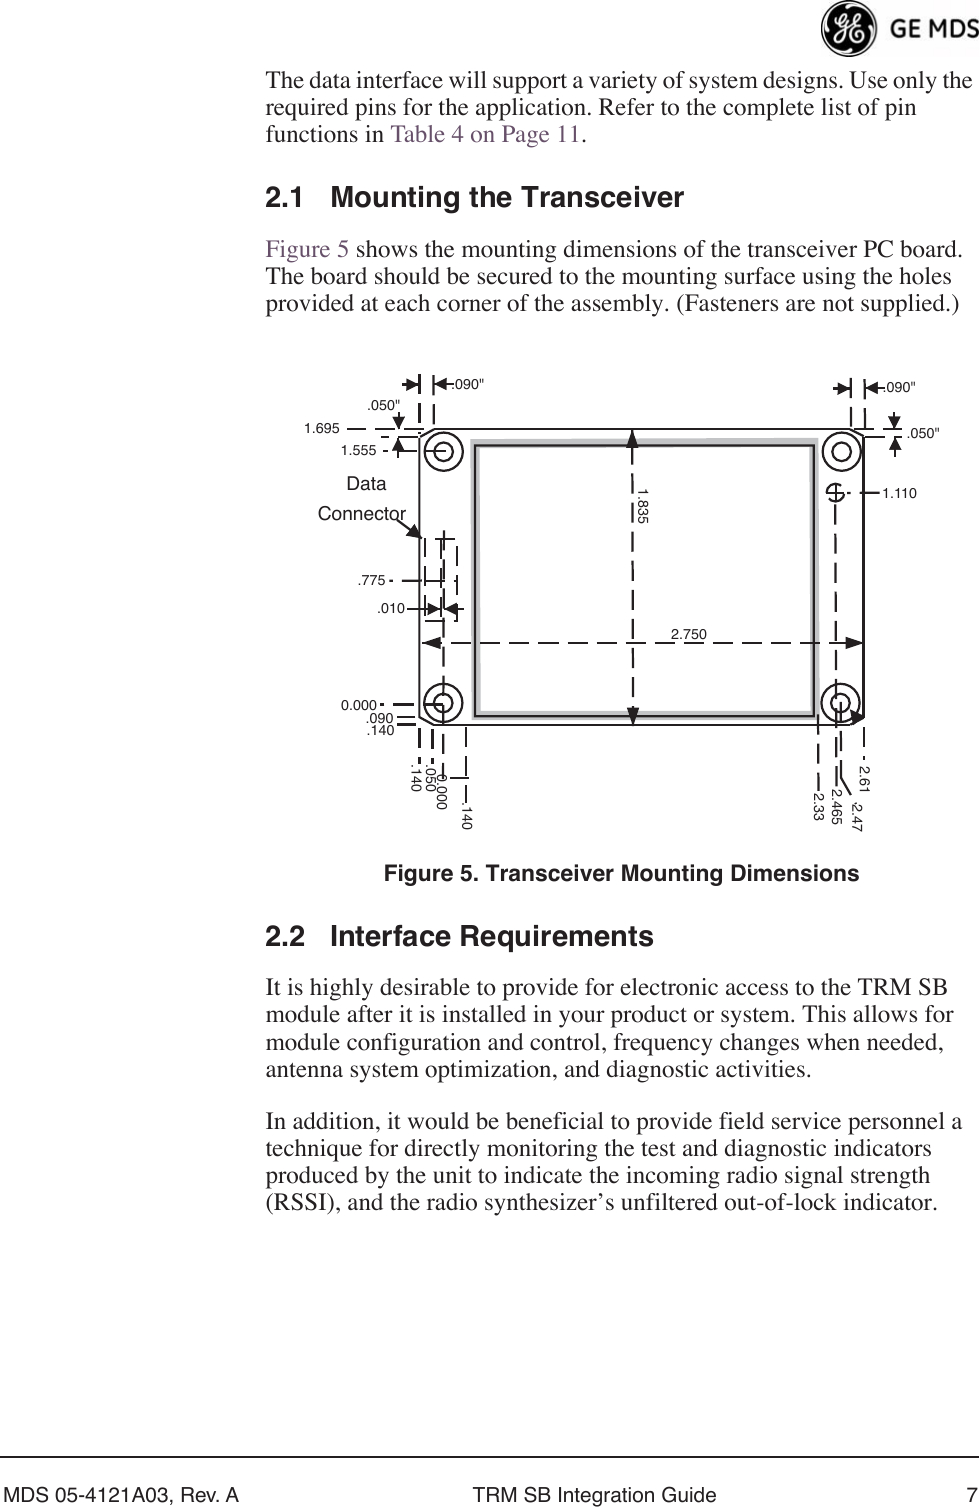  MDS 05-4121A03, Rev. A TRM SB Integration Guide 7 The data interface will support a variety of system designs. Use only the required pins for the application.   Refer to the complete list of pin functions in Table 4 on Page 11. 2.1 Mounting the Transceiver Figure 5 shows the mounting dimensions of the transceiver PC board. The board should be secured to the mounting surface using the holes provided at each corner of the assembly. (Fasteners are not supplied.)  Invisible place holder Figure 5. Transceiver Mounting Dimensions  2.2 Interface Requirements It is highly desirable to provide for electronic access to the TRM SB module after it is installed in your product or system. This allows for module configuration and control, frequency changes when needed, antenna system optimization, and diagnostic activities.In addition, it would be beneficial to provide field service personnel a technique for directly monitoring the test and diagnostic indicators produced by the unit to indicate the incoming radio signal strength (RSSI), and the radio synthesizer’s unfiltered out-of-lock indicator. .1400.0000.0002.472.61.1401.5551.6952.7501.8352.33.140DataConnector.090&quot; .090&quot;.050&quot;.050&quot;.010.7752.4651.110.090.050